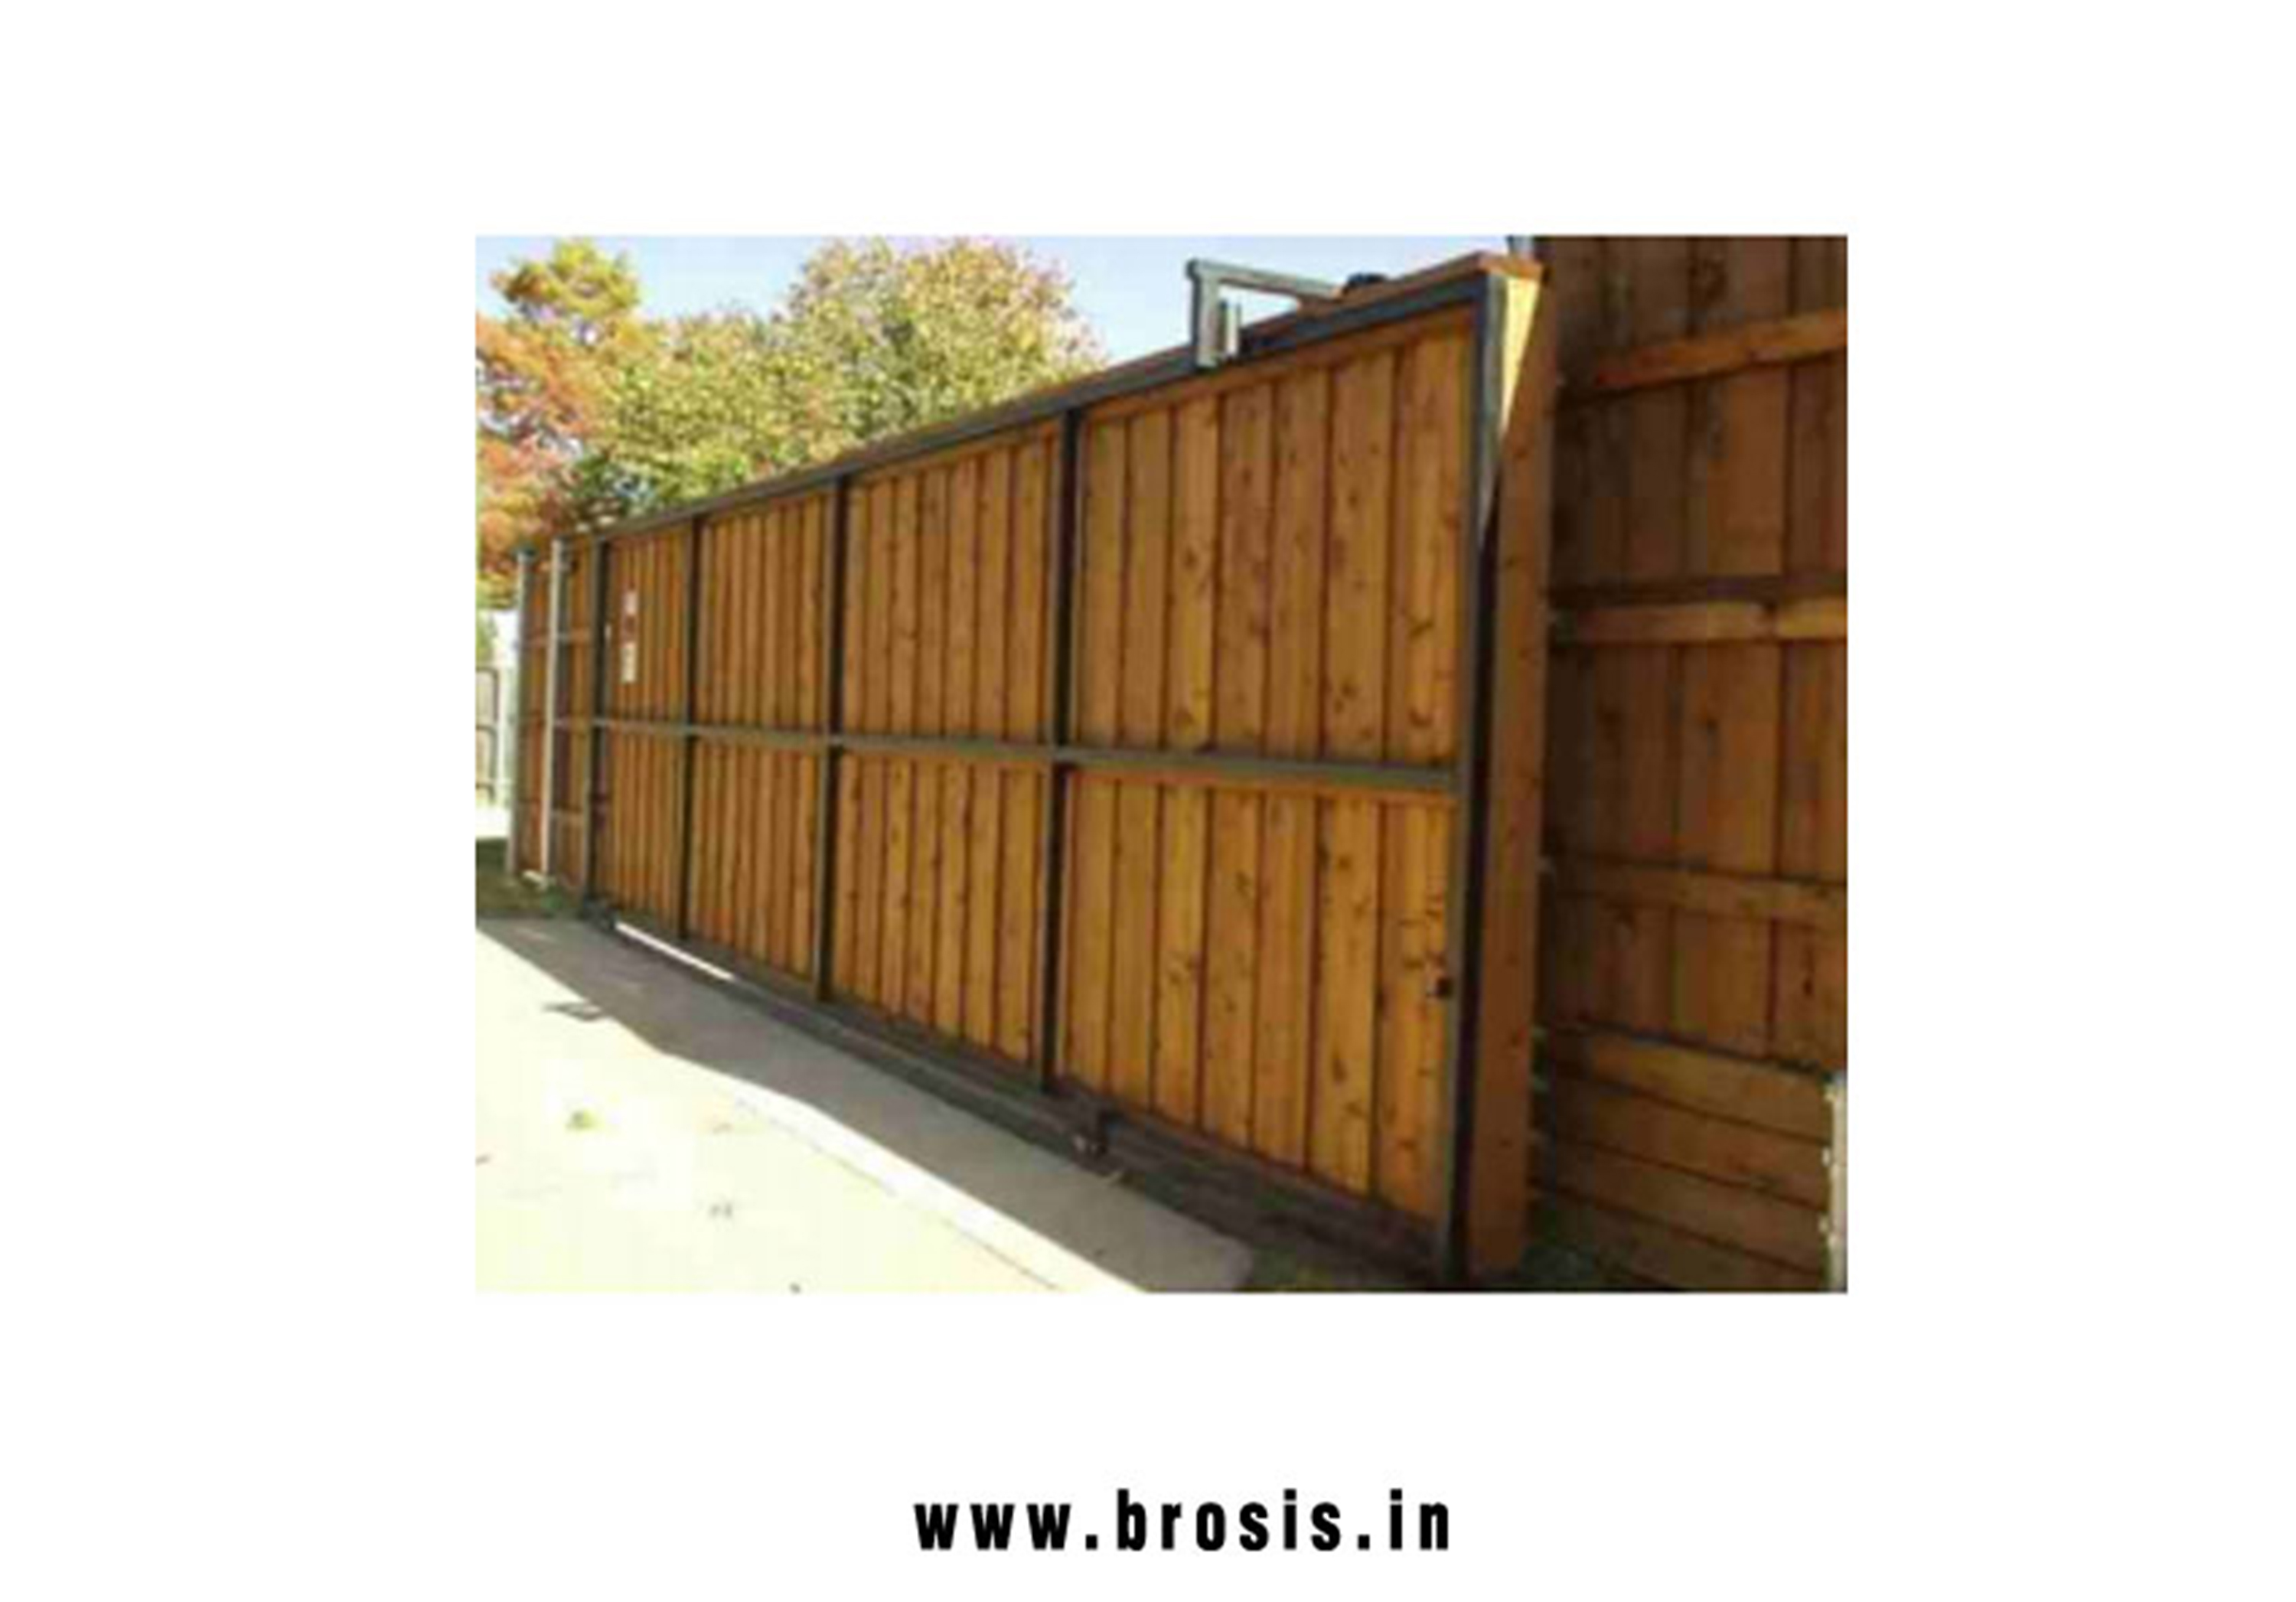 Automatic Sliding Gate manufacturers exporters in India Punjab Ludhiana